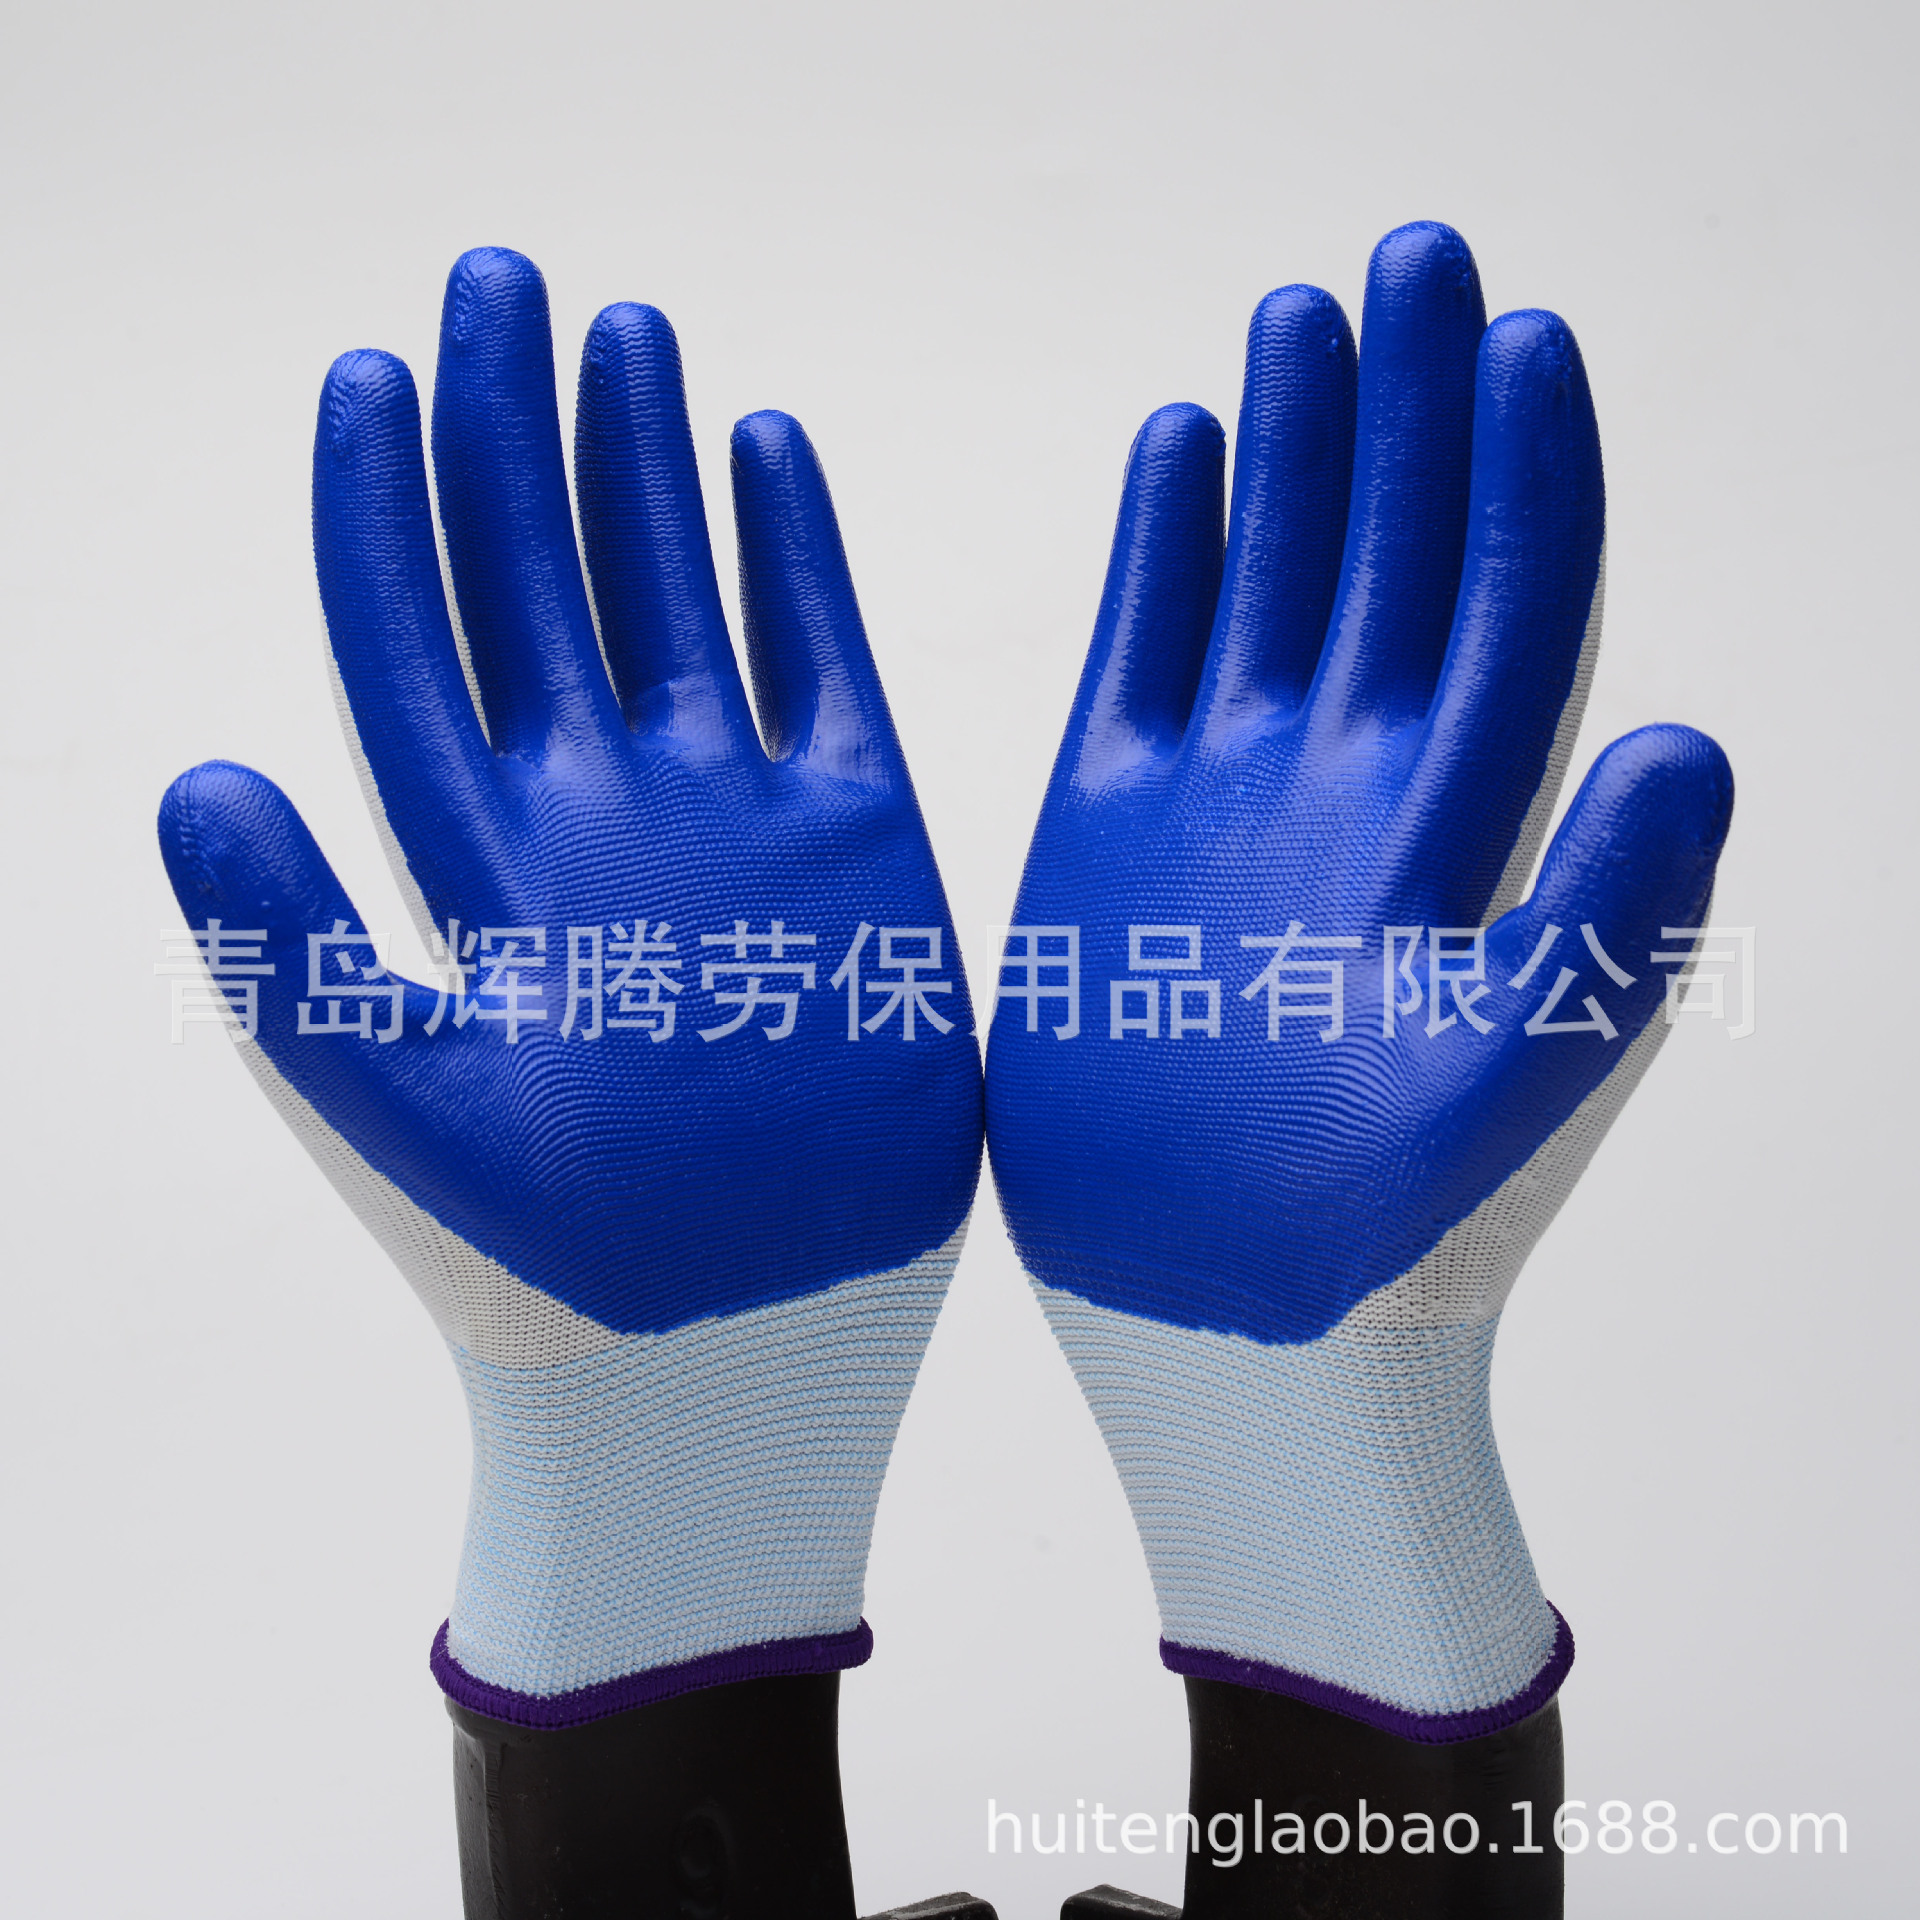 Breathable Protective Gloves for Labor Protection 13-Pin Nitrile Rubber Pvc Latex Dipped Gloves Nylon Protective Gloves